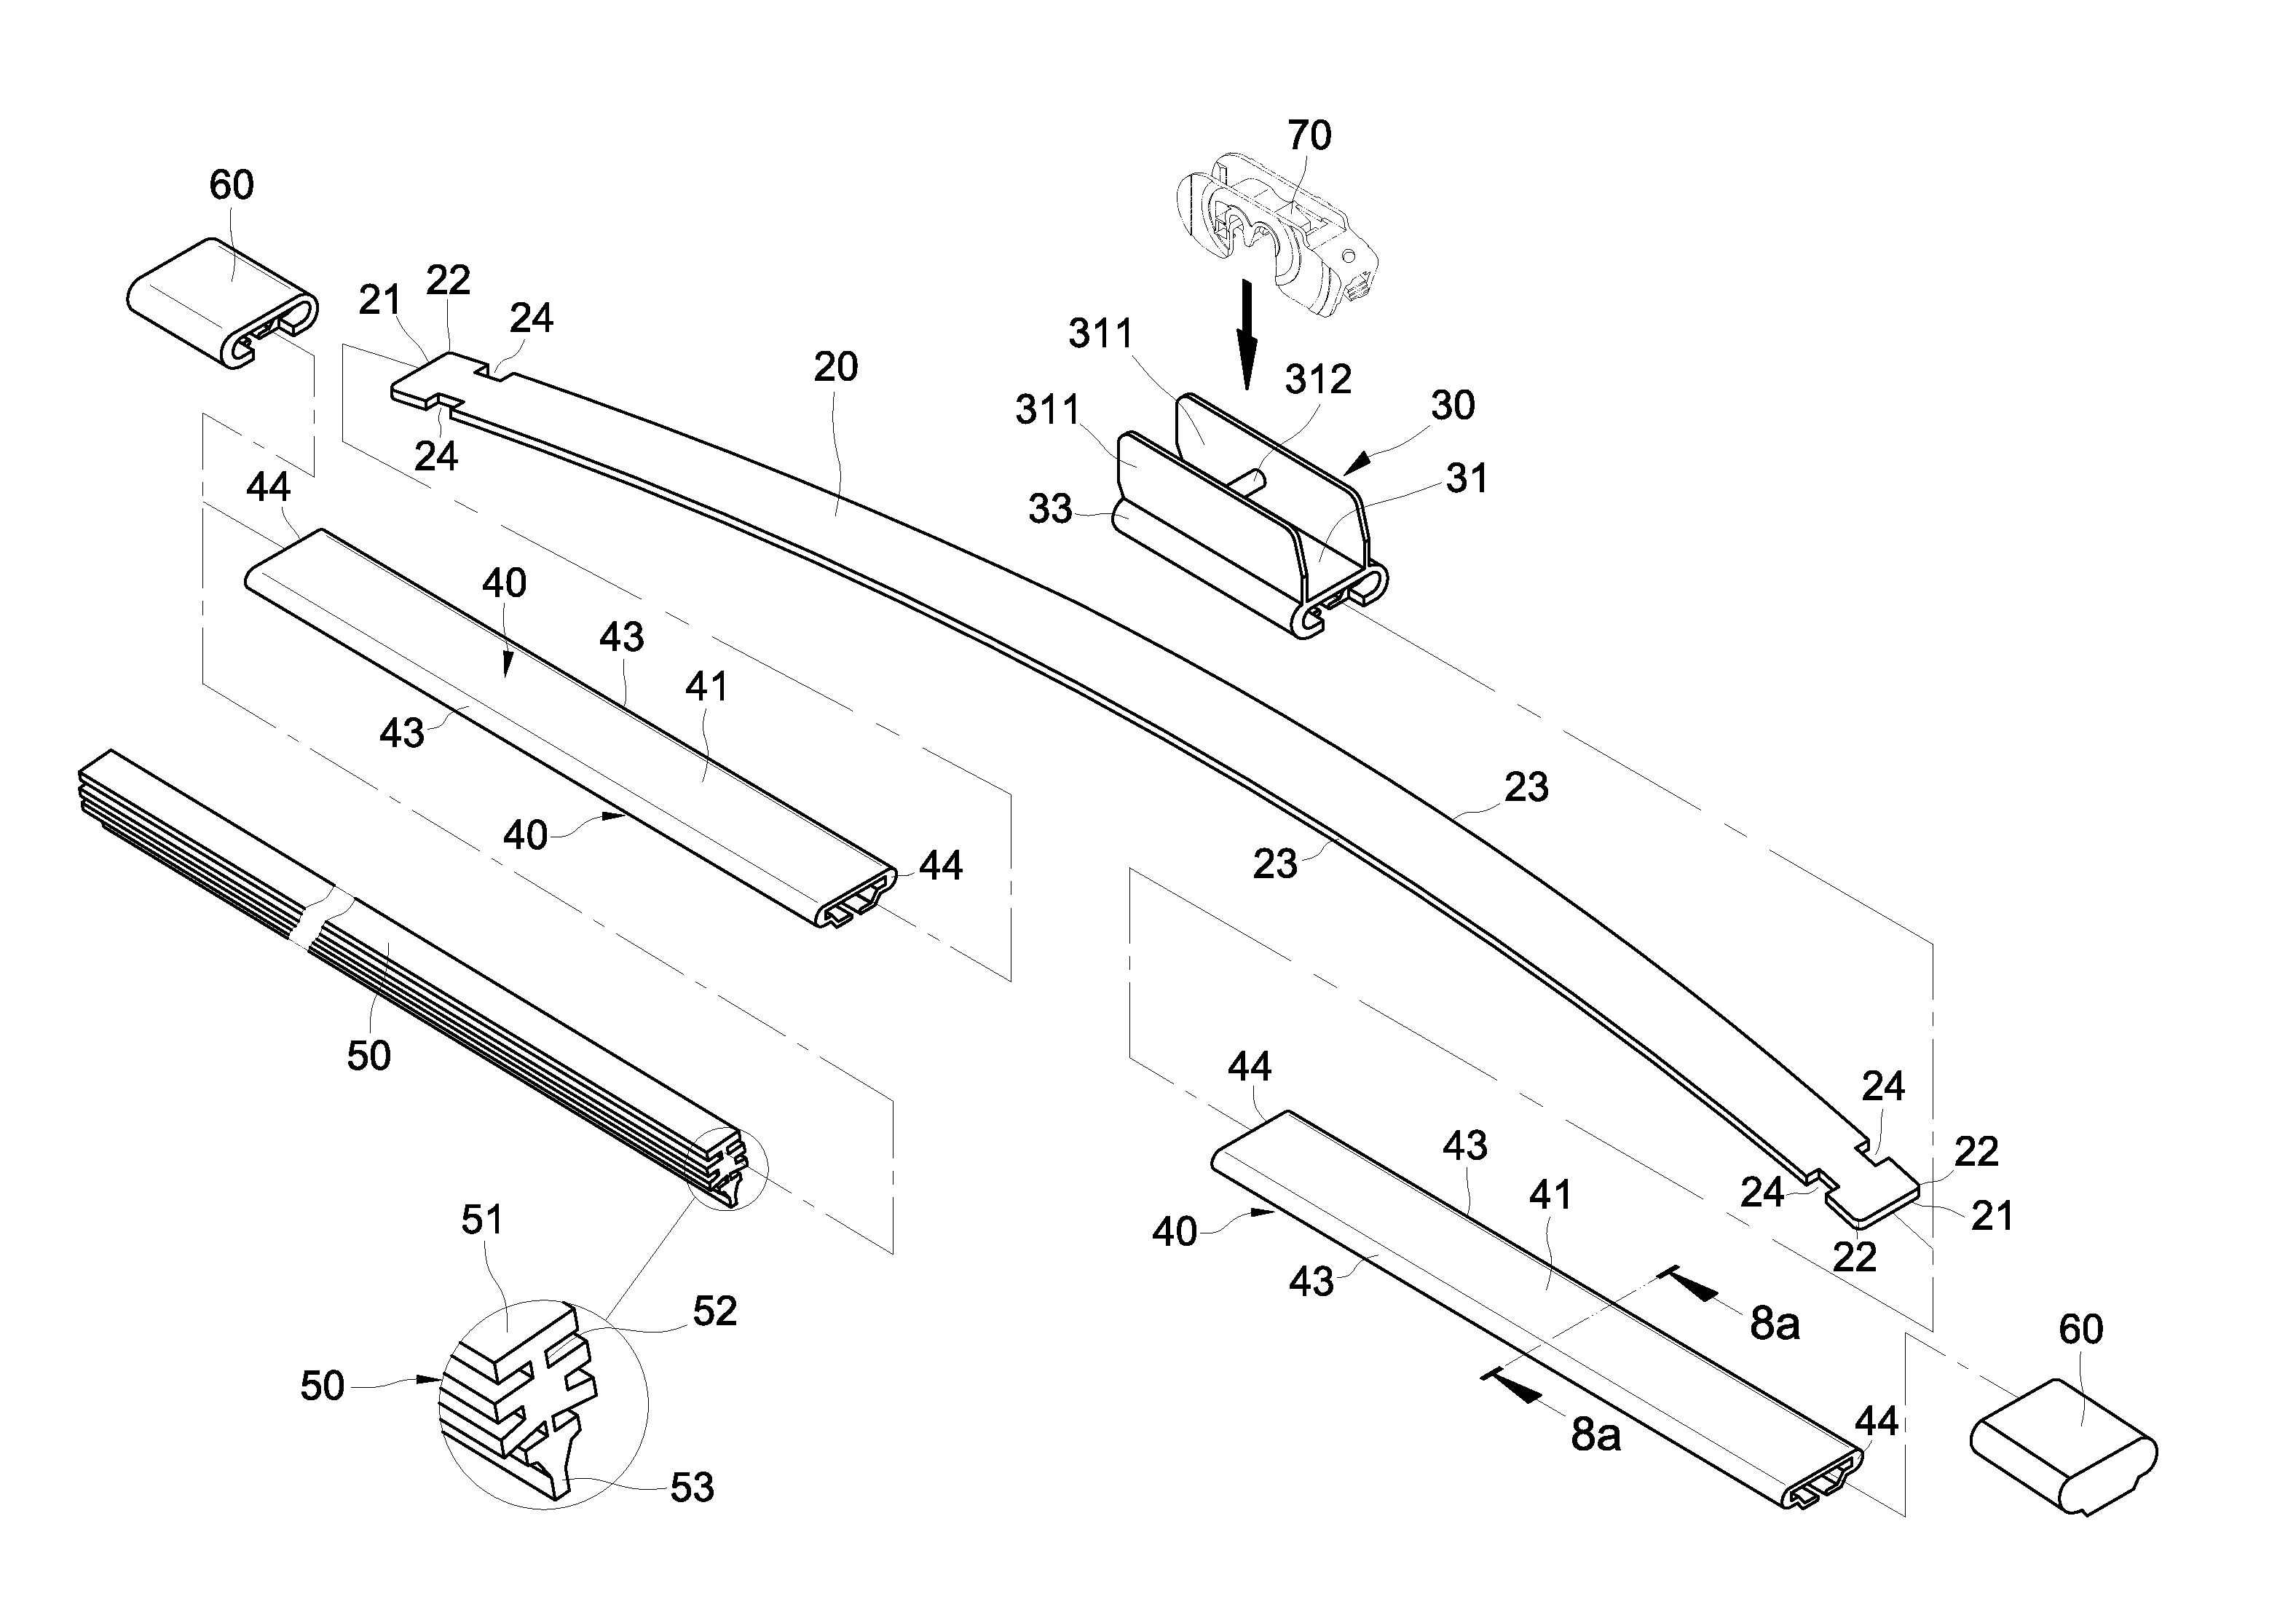 Flat blade wiper for vehicle